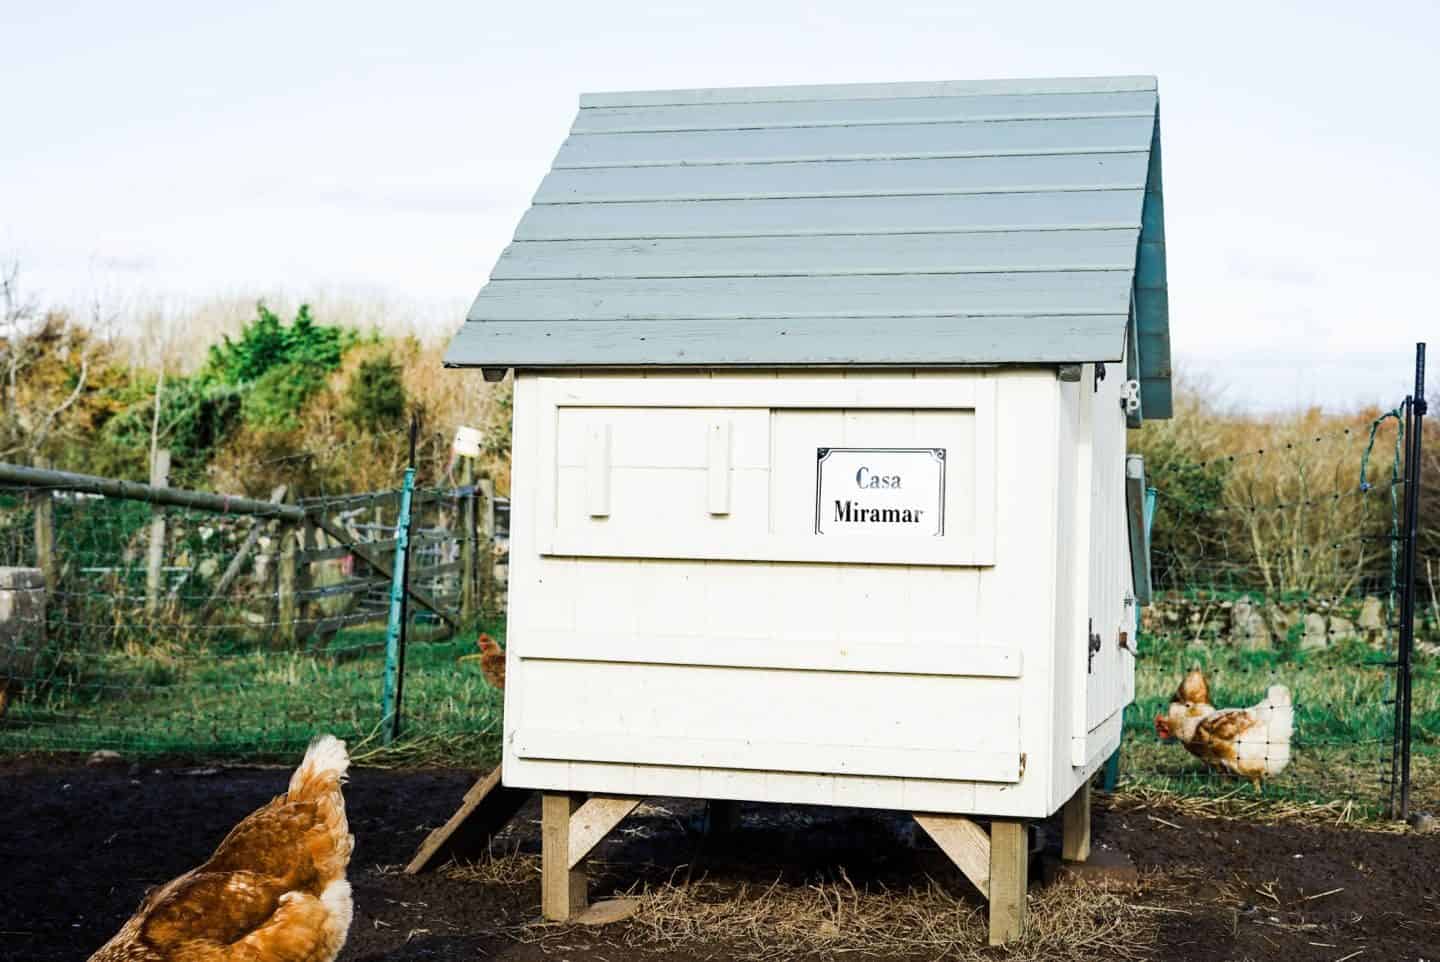 enamel house signs by Ramsign seen on a chicken coup